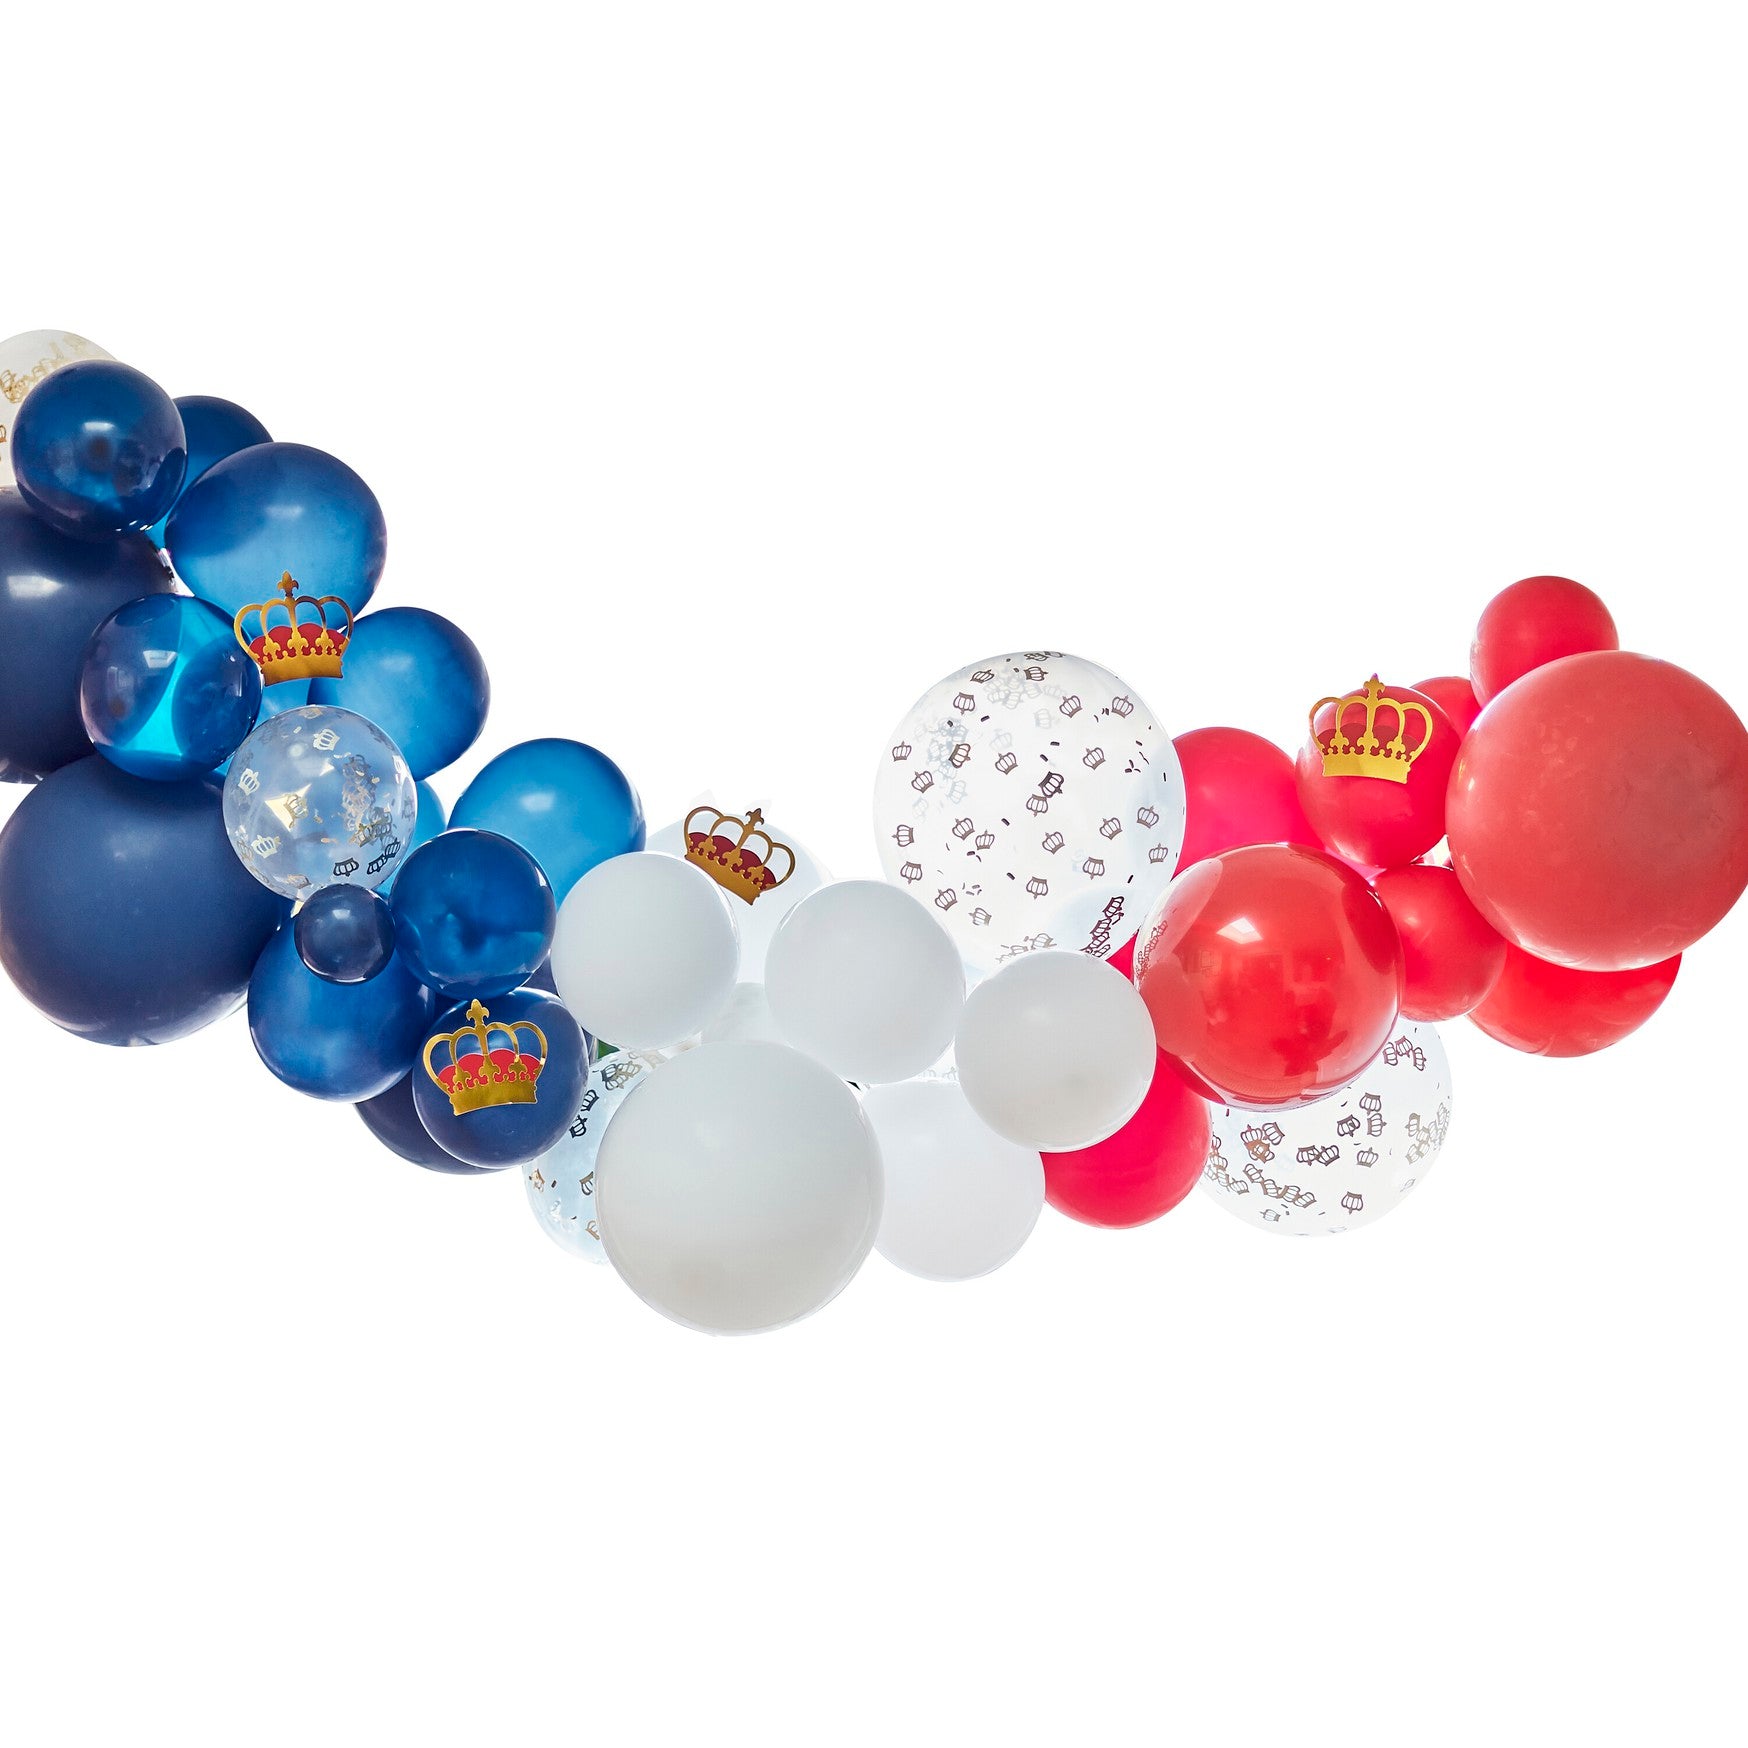 red, white, and blue balloon arch on a white background